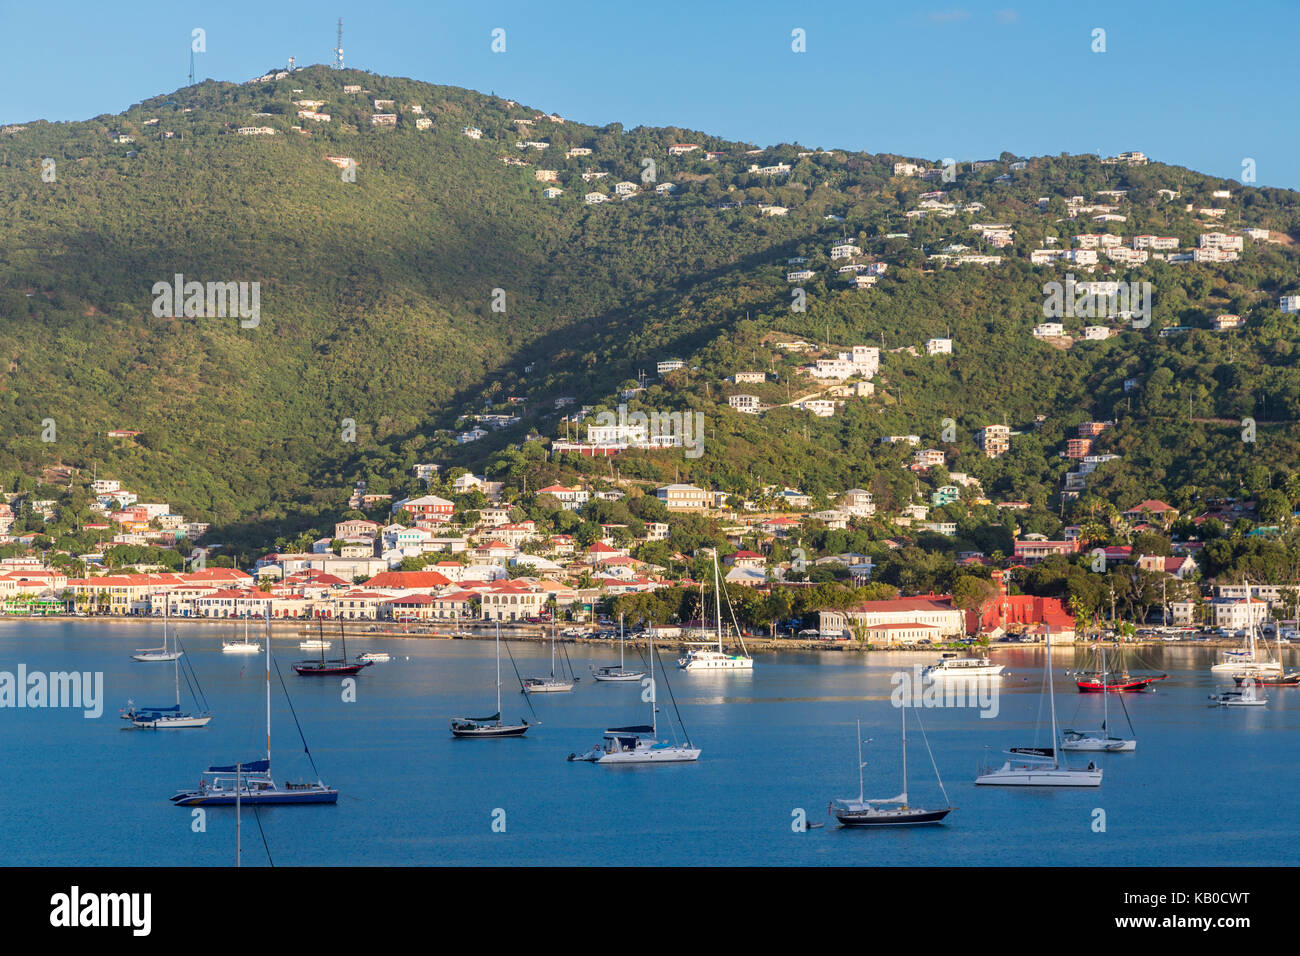 Charlotte Amalie, St. Thomas, U.S. Virgin Islands.  View of the Town While Approaching Cruise Ship Pier. Stock Photo